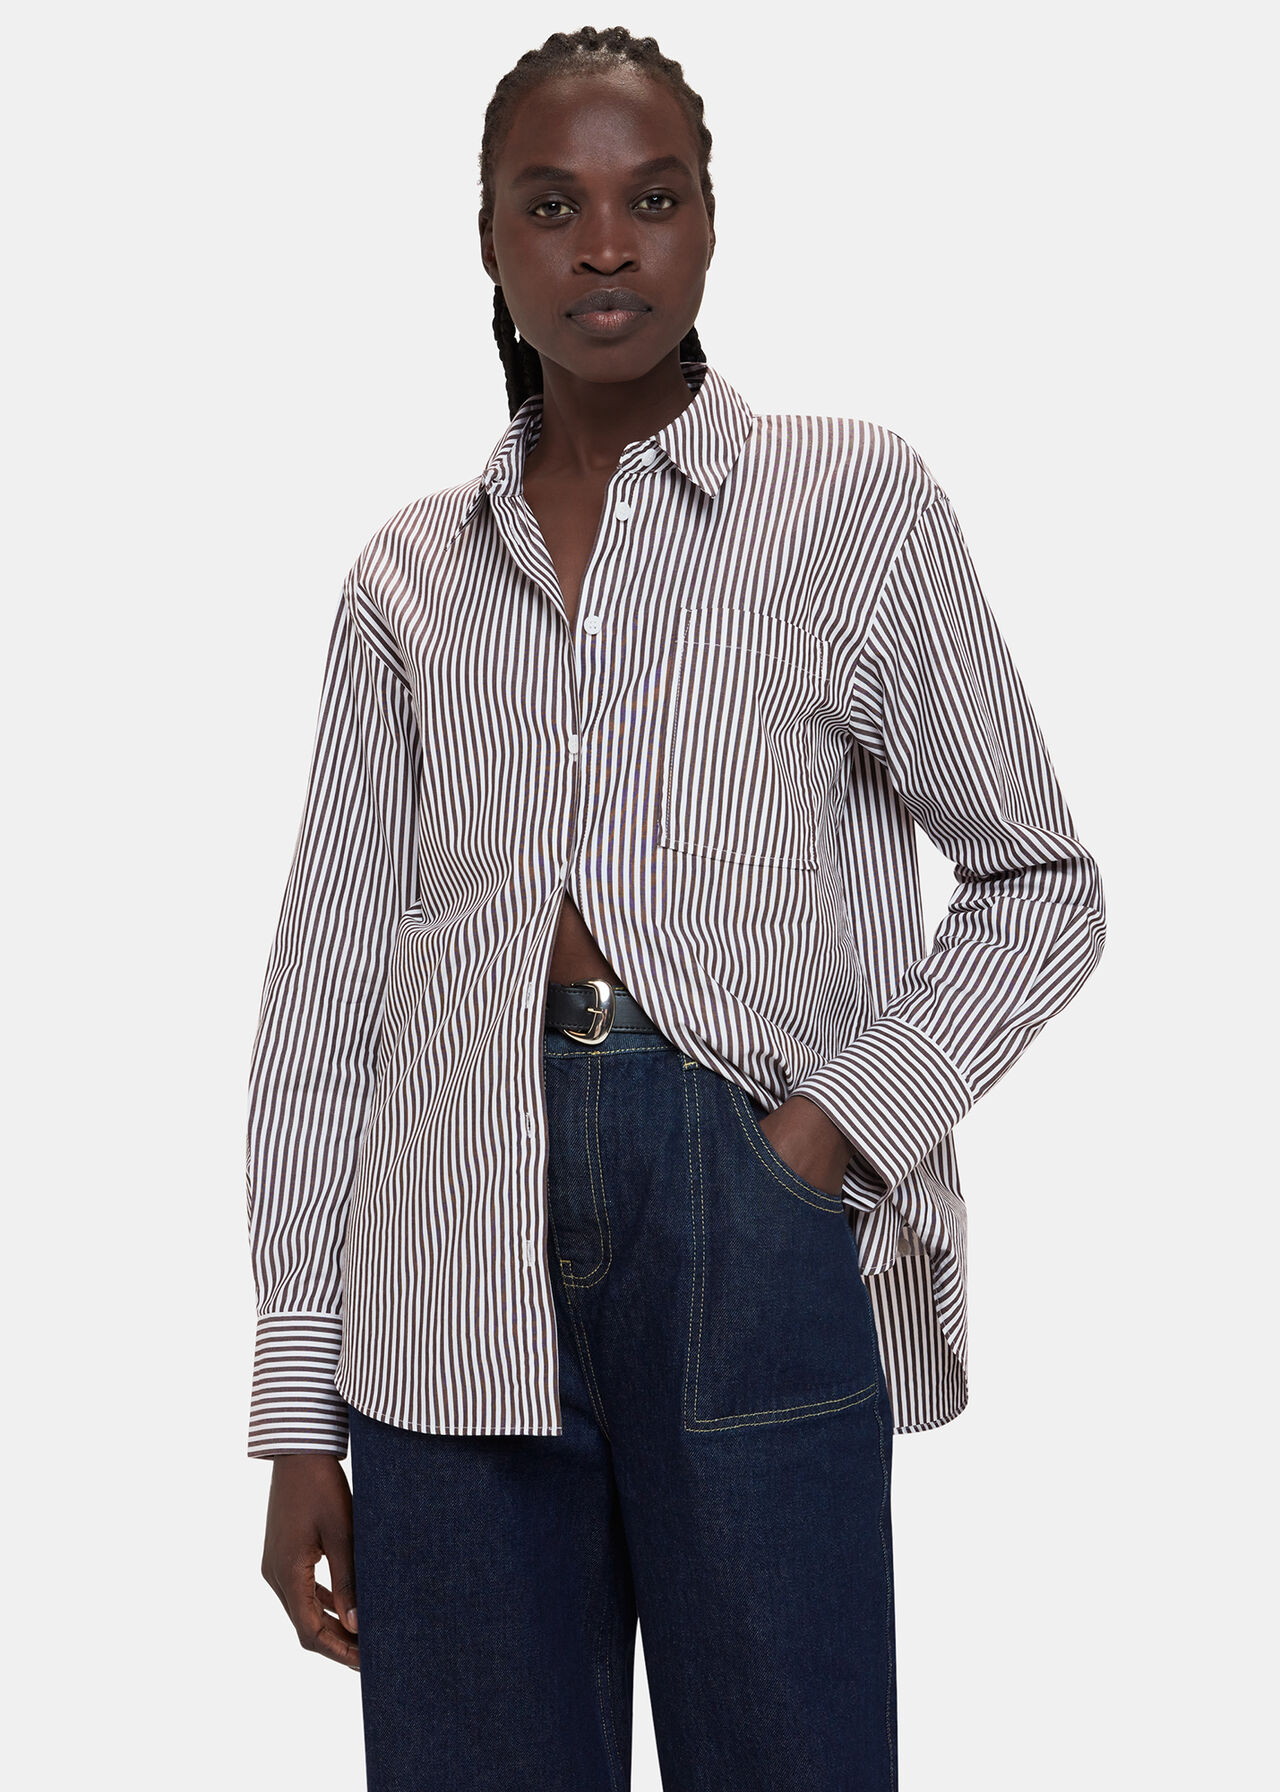 Black & White Striped Shirt | Relaxed Fit | Order Now at Whistles |